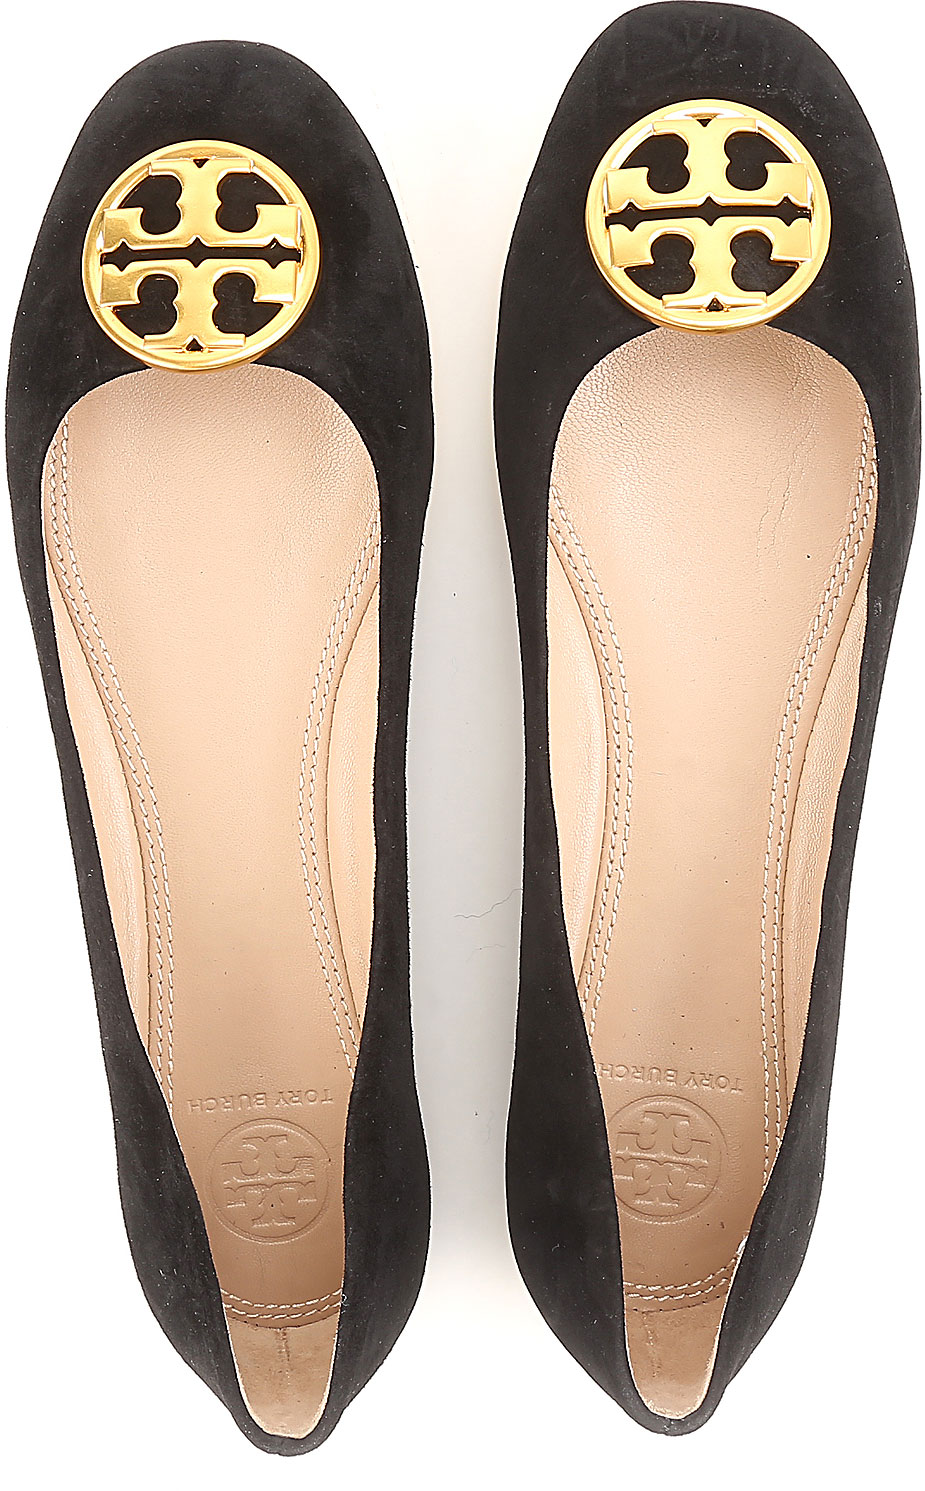 Womens Shoes Tory Burch, Style code: 42934-001-